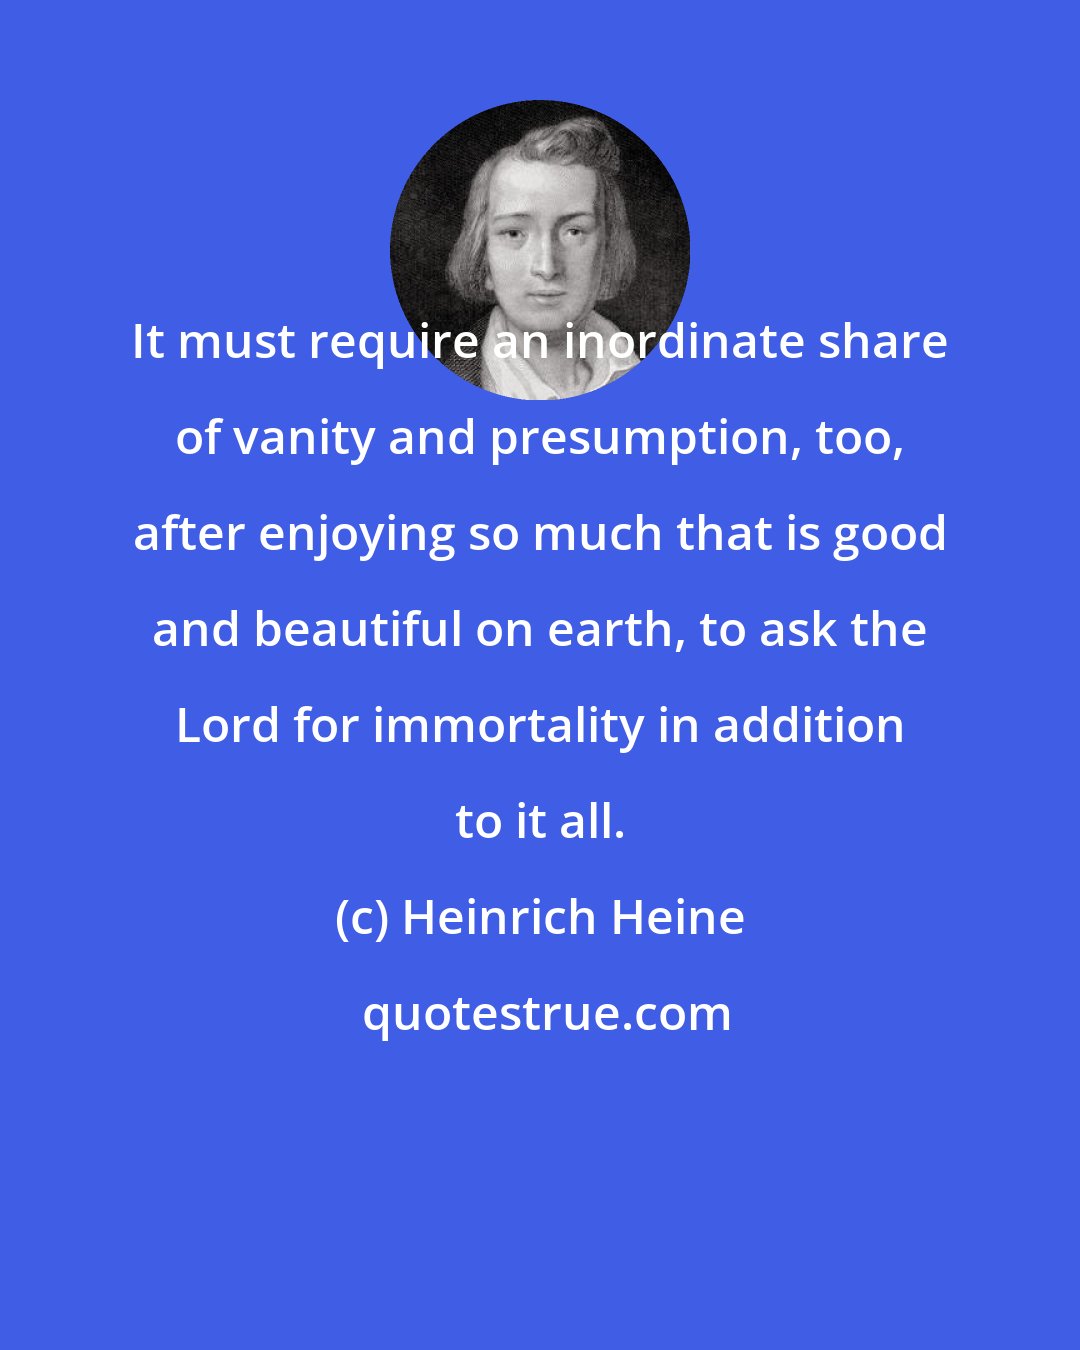 Heinrich Heine: It must require an inordinate share of vanity and presumption, too, after enjoying so much that is good and beautiful on earth, to ask the Lord for immortality in addition to it all.